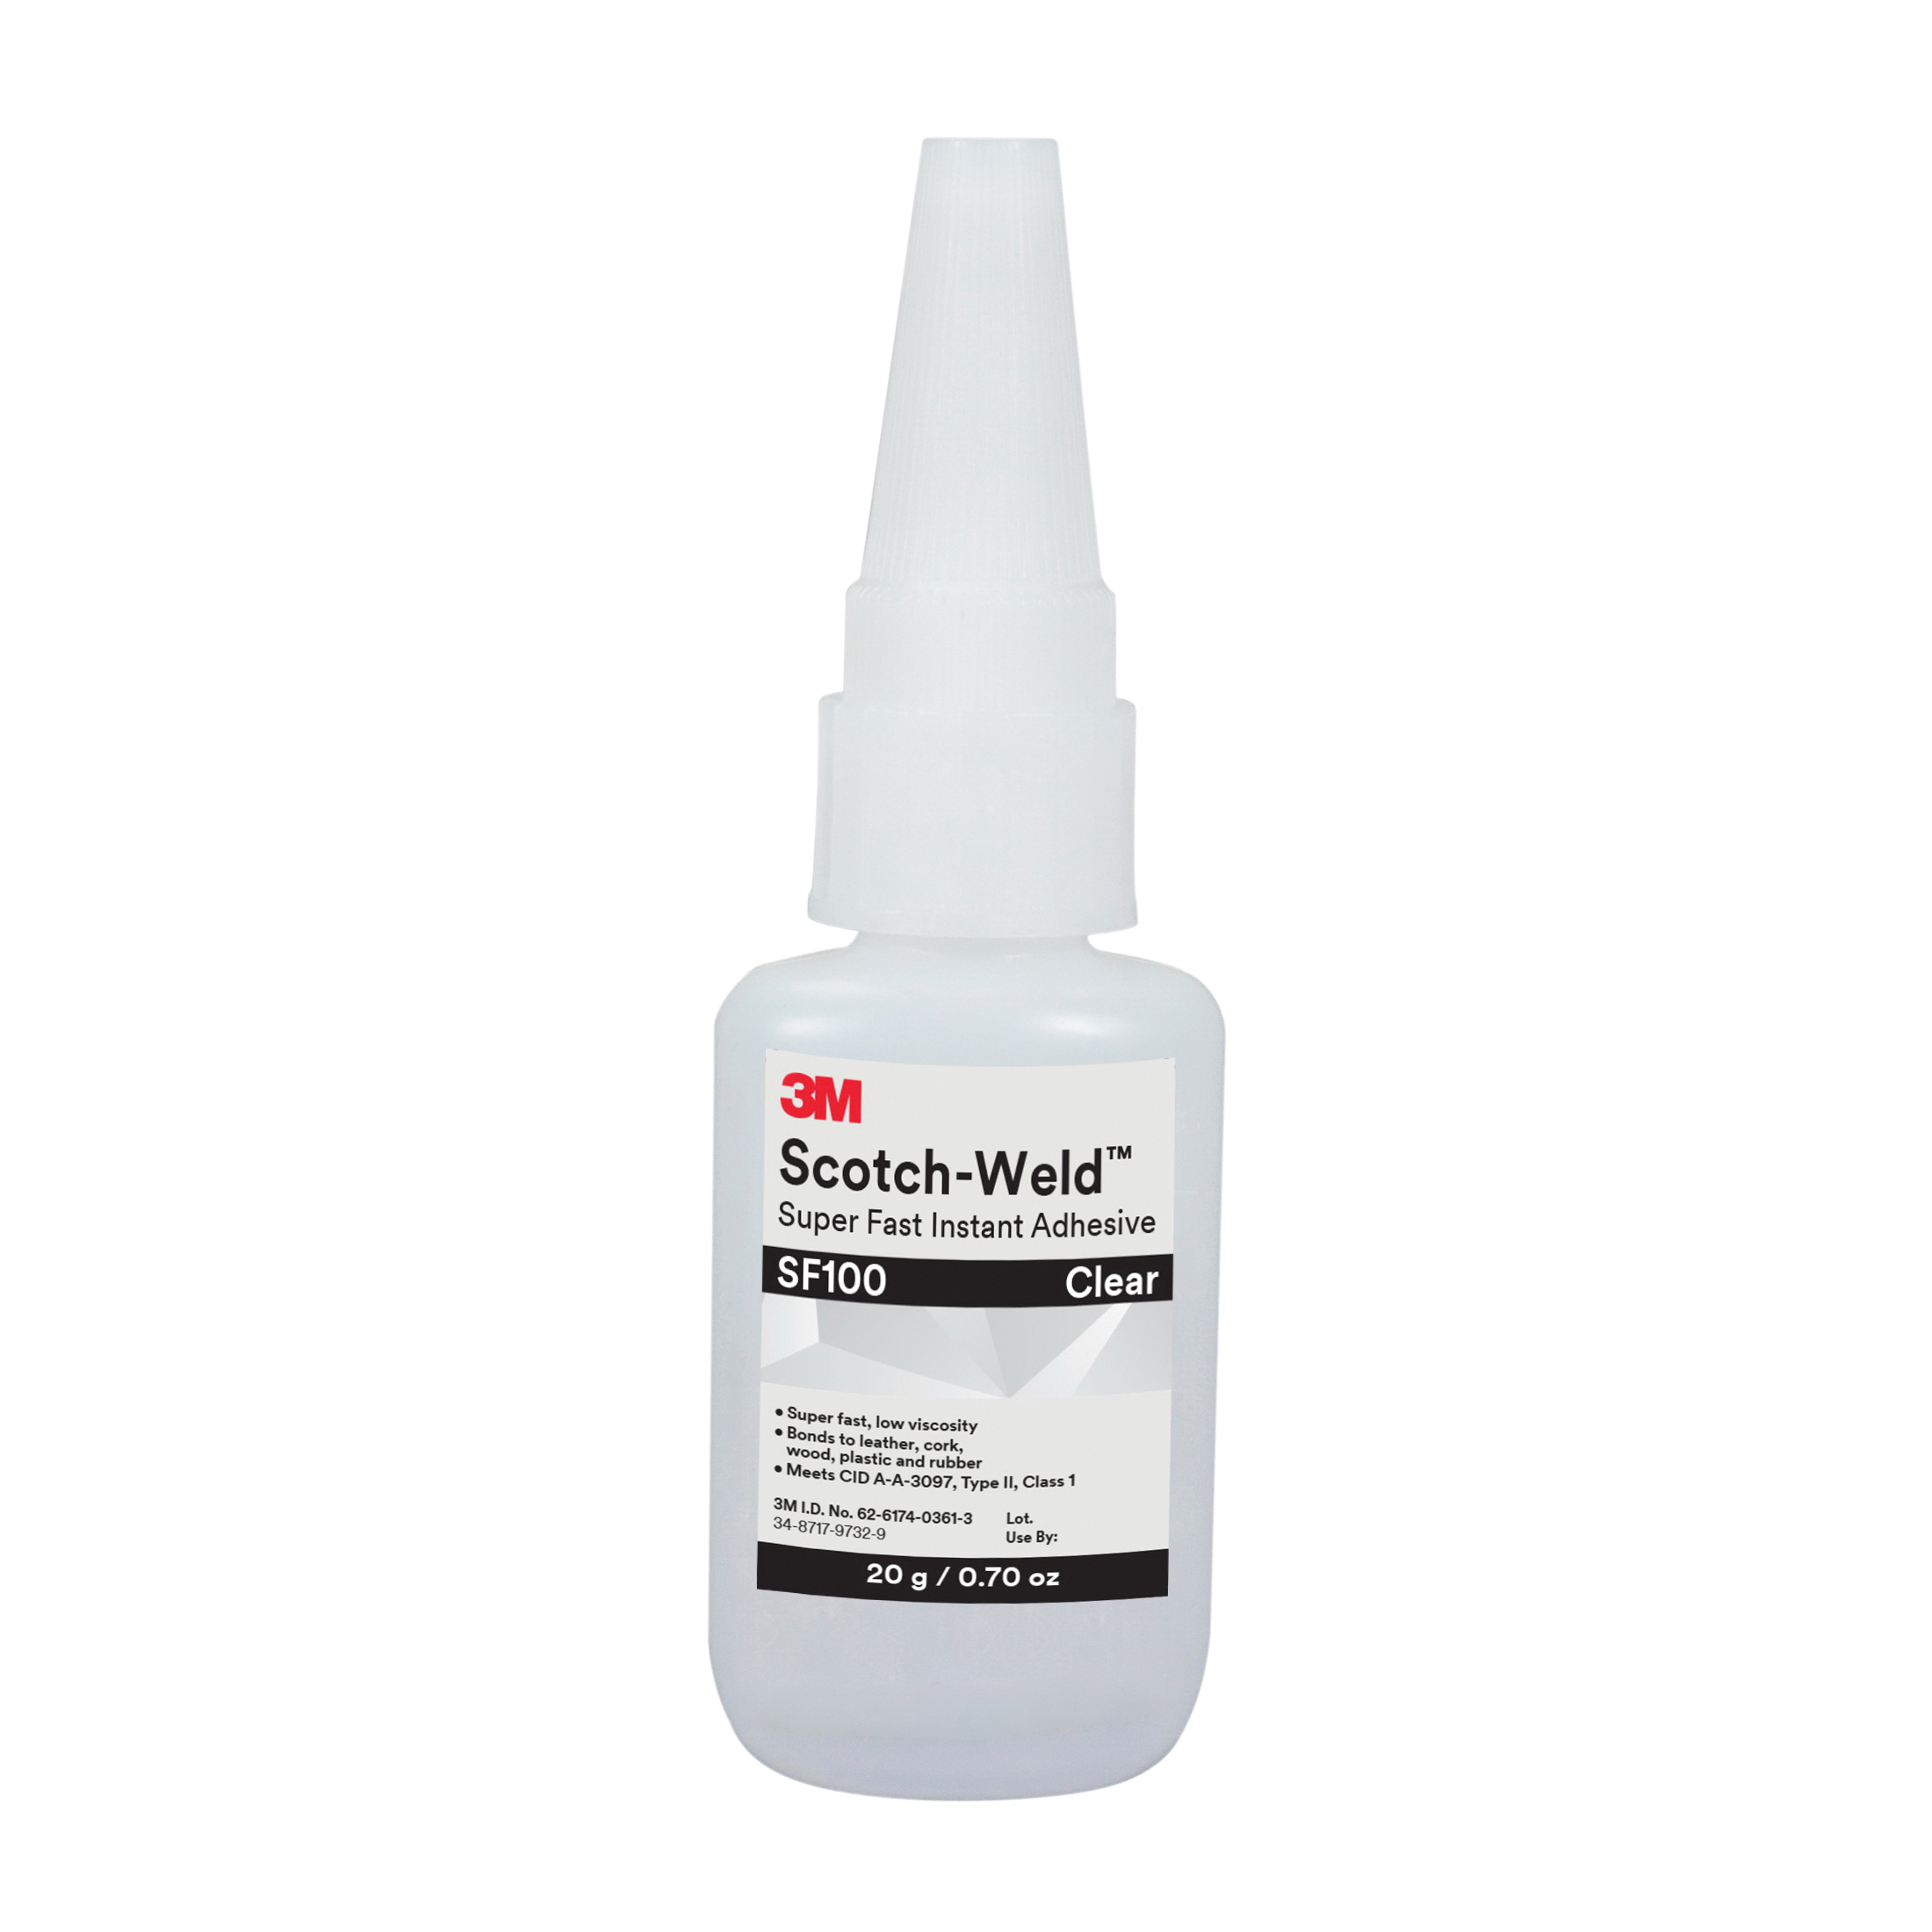 Scotch-Weld™ 048011-62629 Super Fast Instant Adhesive, 1 lb Bottle, Clear, 24 hr at 72 deg F Curing